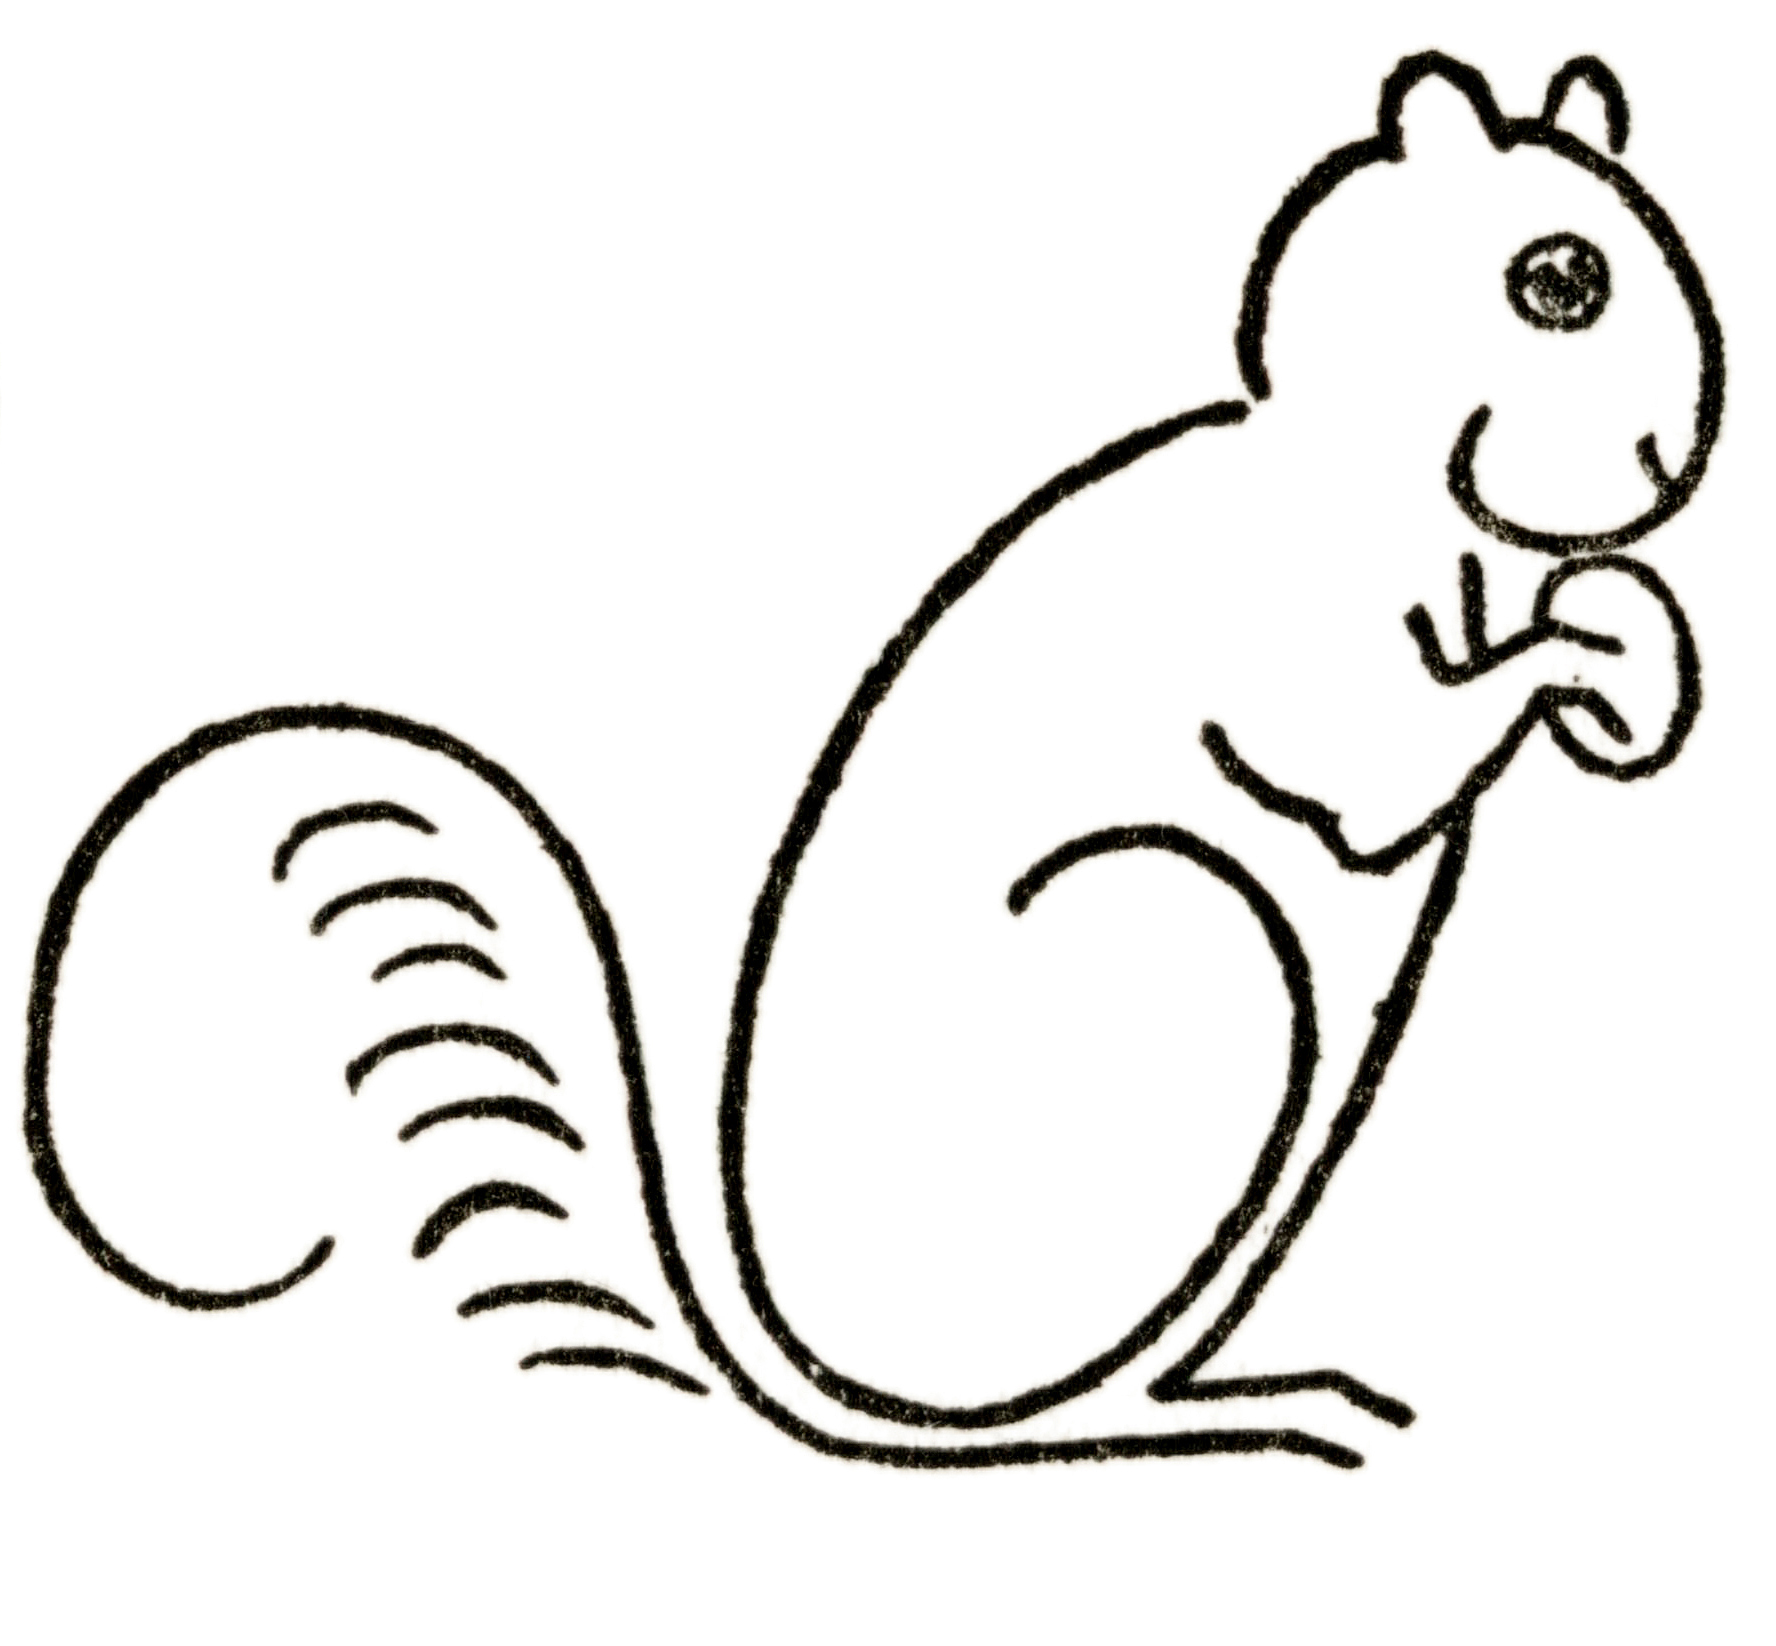 How to Draw a Simple Squirrel